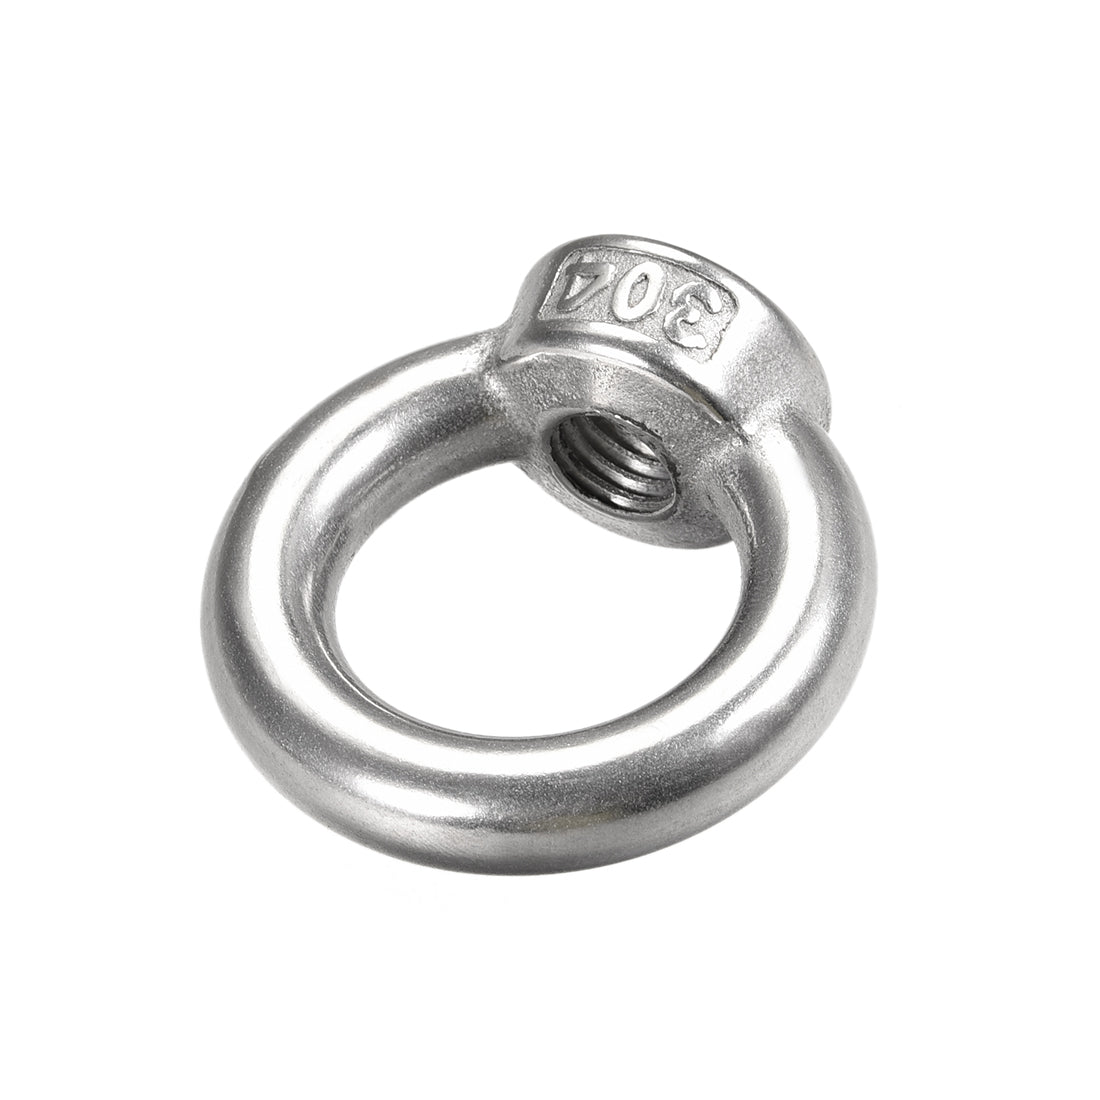 uxcell Uxcell 12mm Female Thread 304 Stainless Steel Lifting Eye Bolt Ring